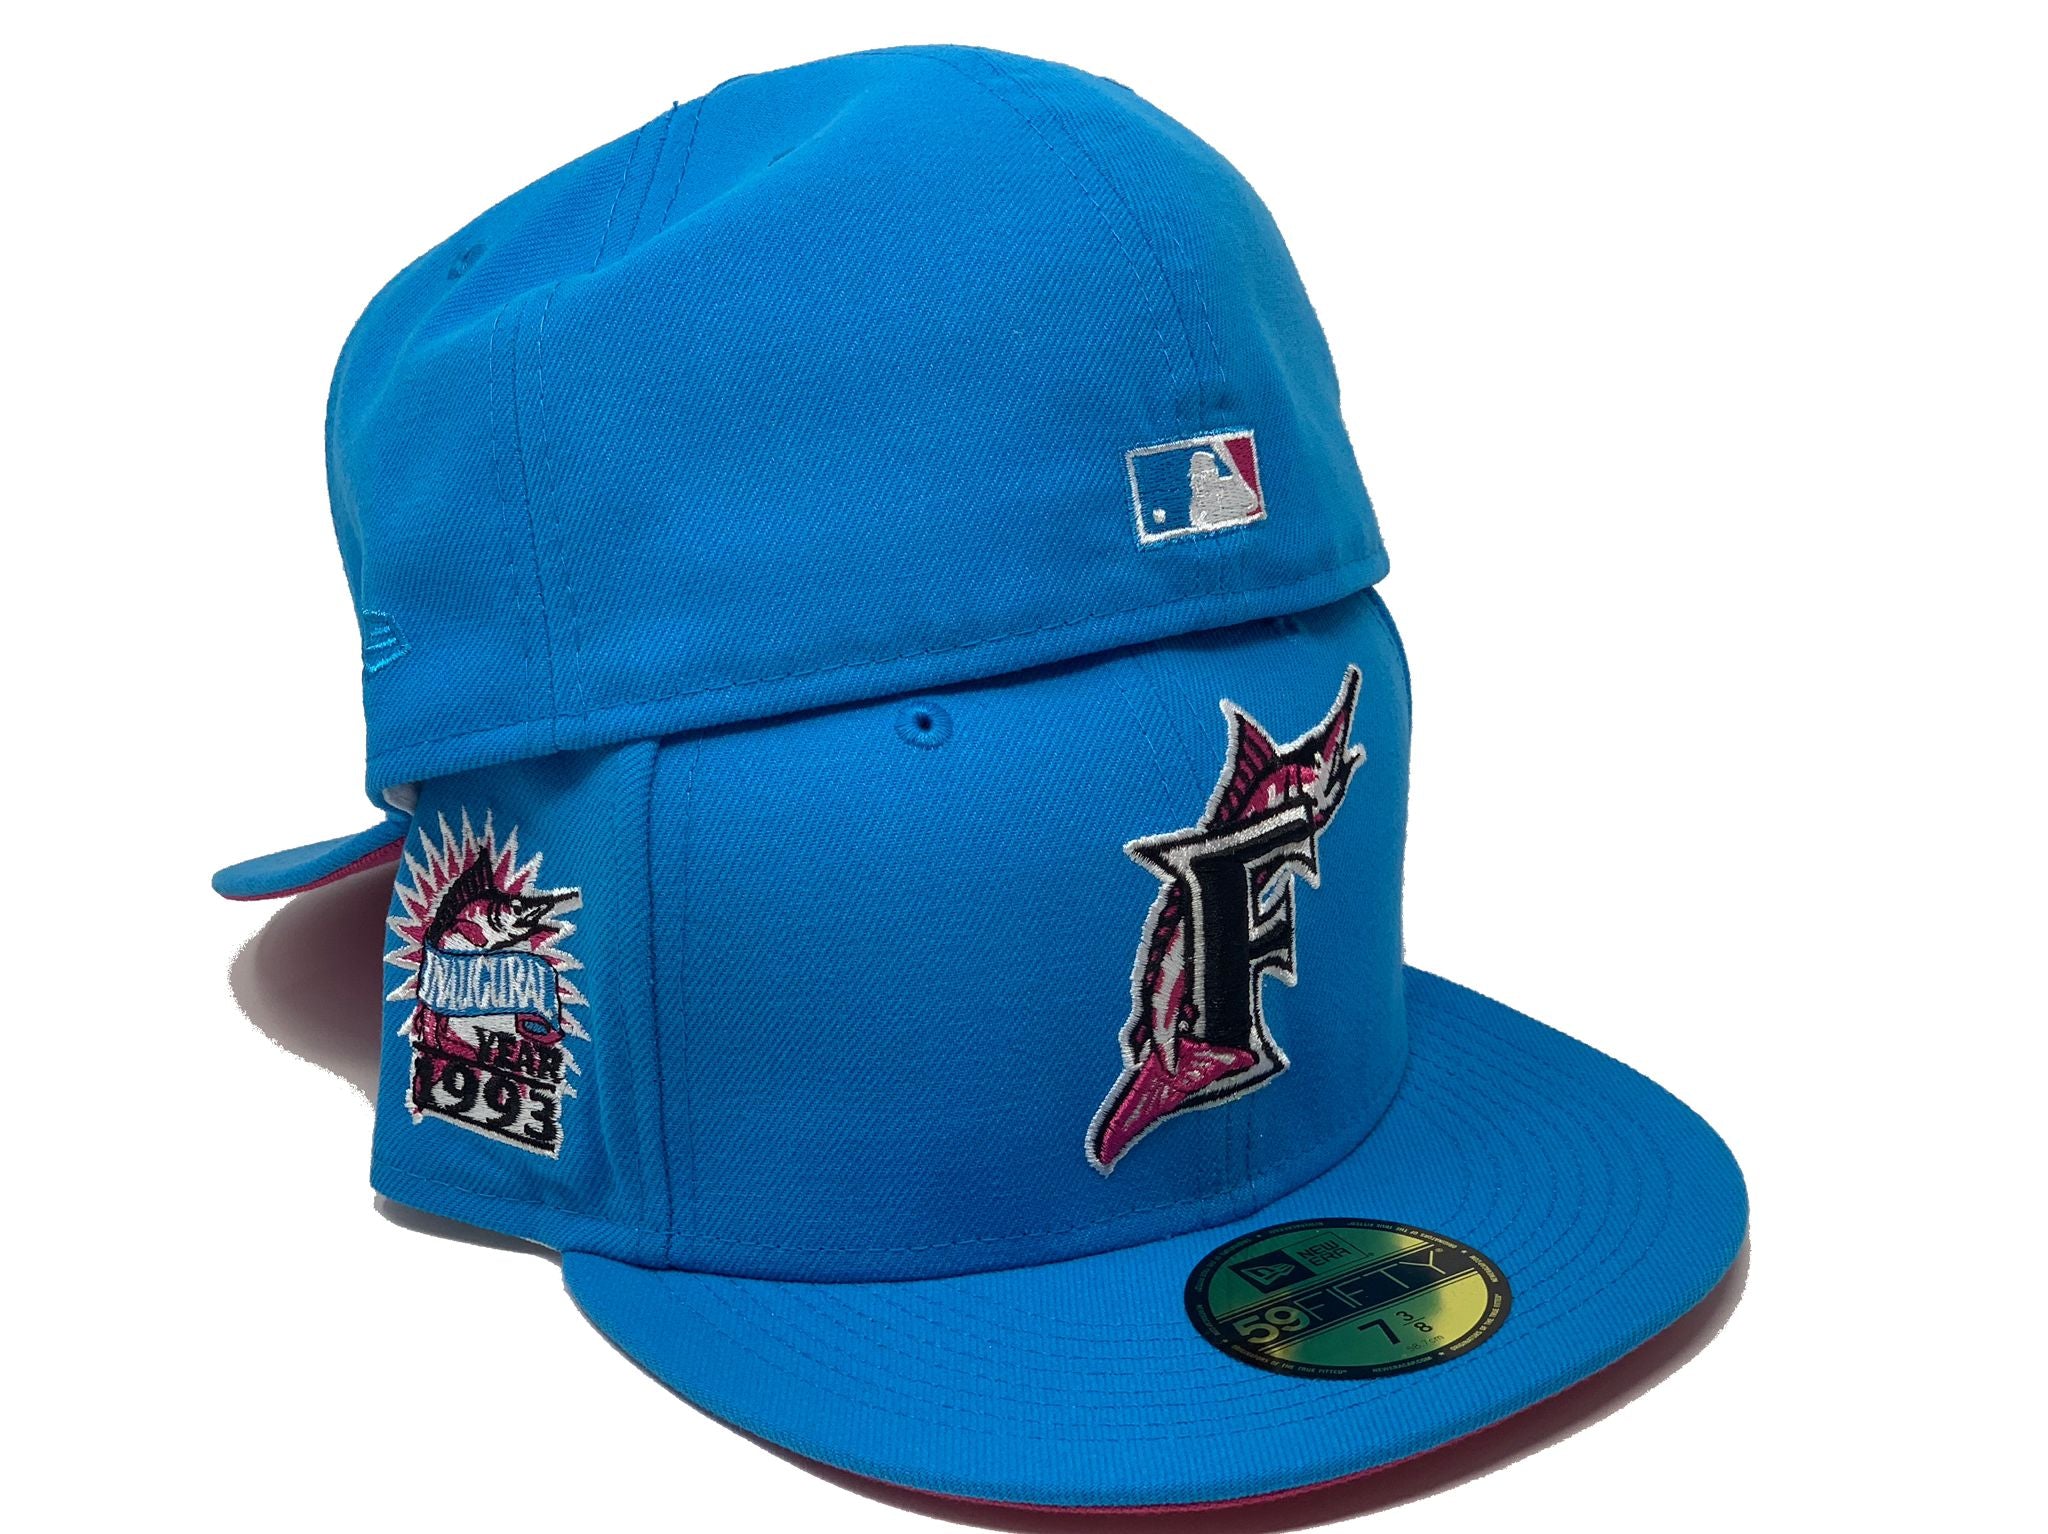 59FIFTY Miami Marlins MLB 2-Tone Color Pack - Blue Tint UV 7 3/4